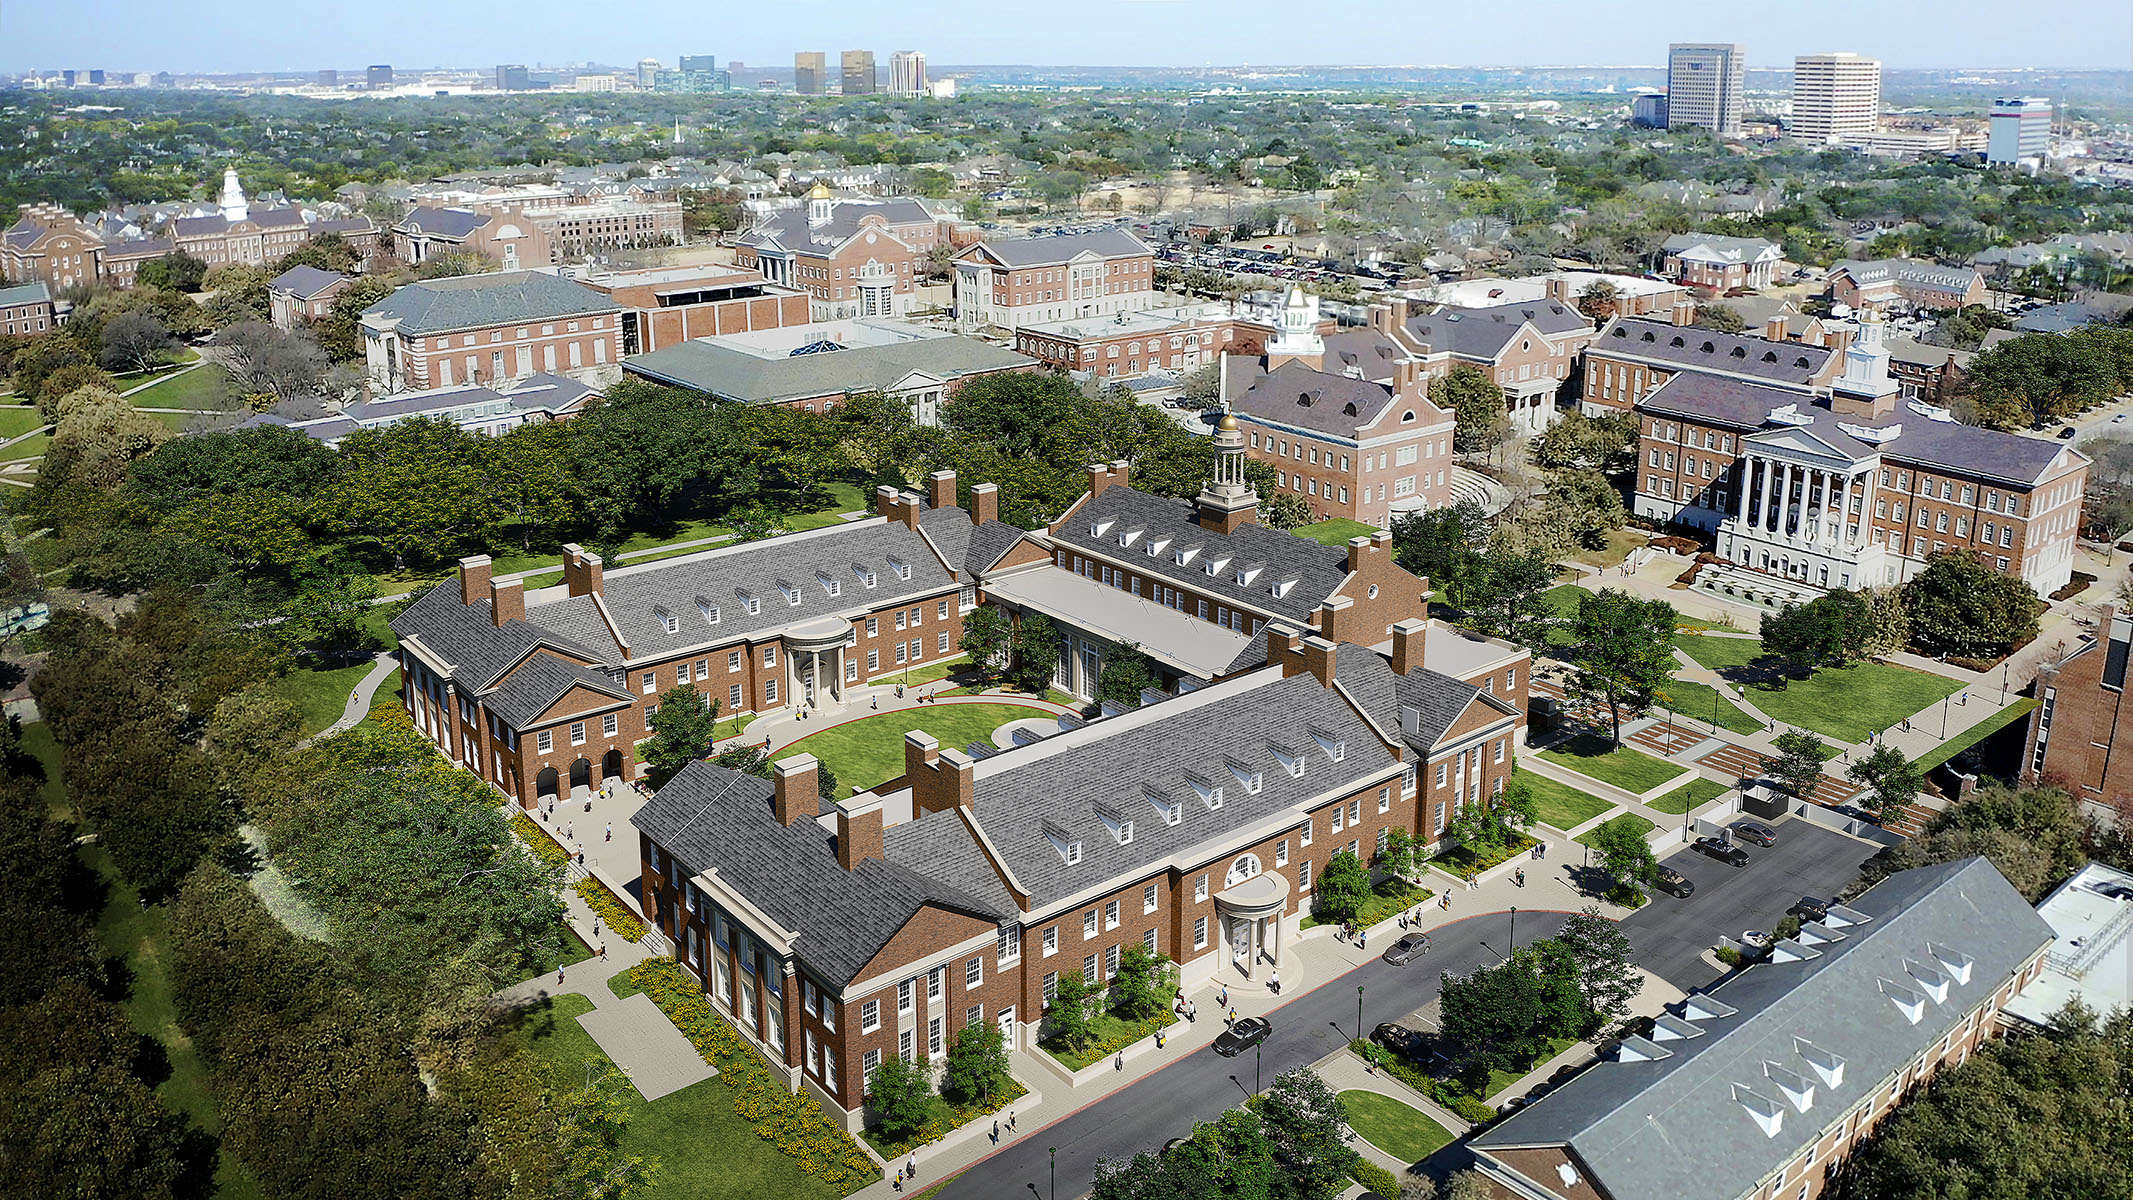 Photorealistic rendering of the new SMU Cox School of Business situated within the SMU campus. Two new wings attach to the original structure, forming a courtyard. The architecture features red brick, Georgian style, matching the campus buildings. In the distance, high-rise towers and Dallas neighborhoods are visible.